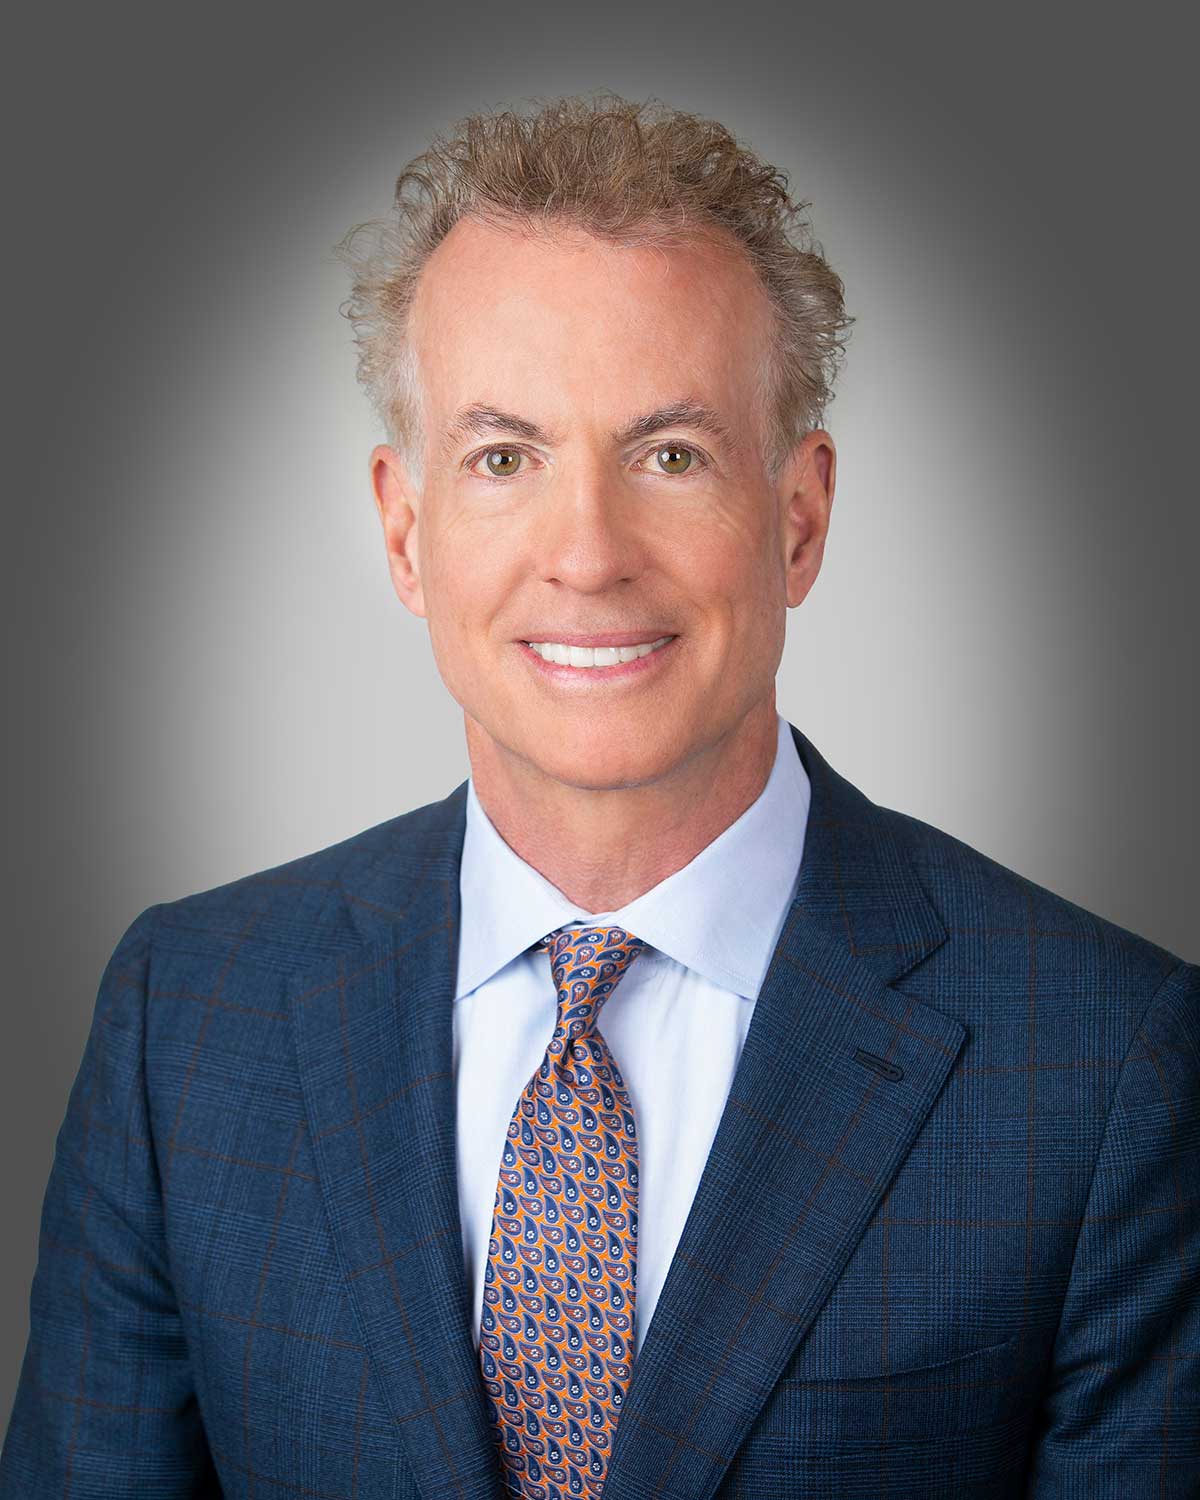 Don Bailey, CEO and Chairman